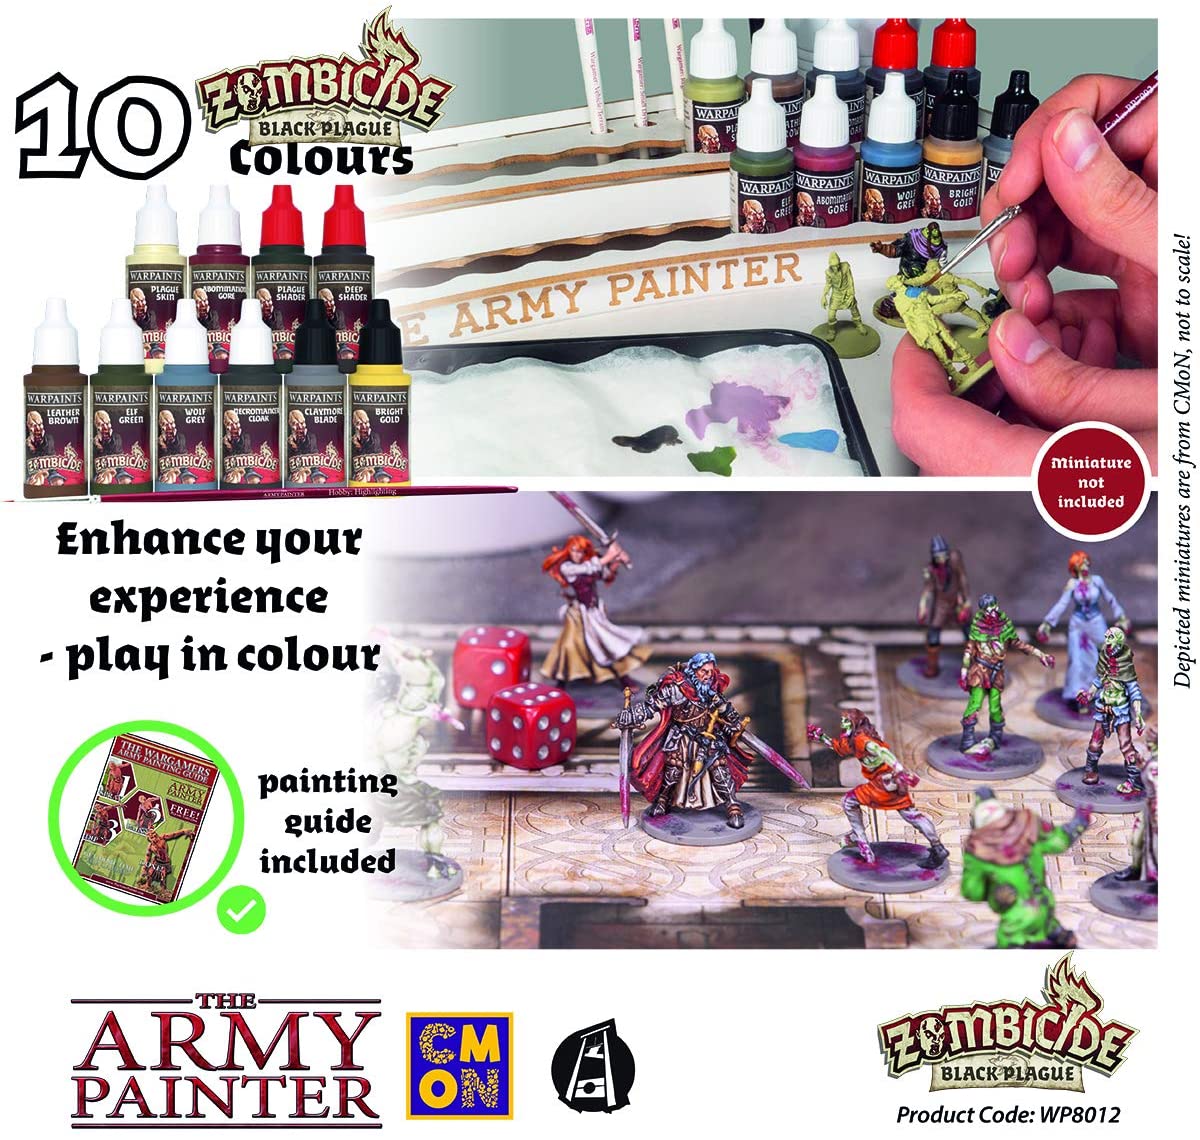 Miniatures Paint Set, 10 Model Paints with FREE Highlighting Brush, 18 –  Wargames Delivered